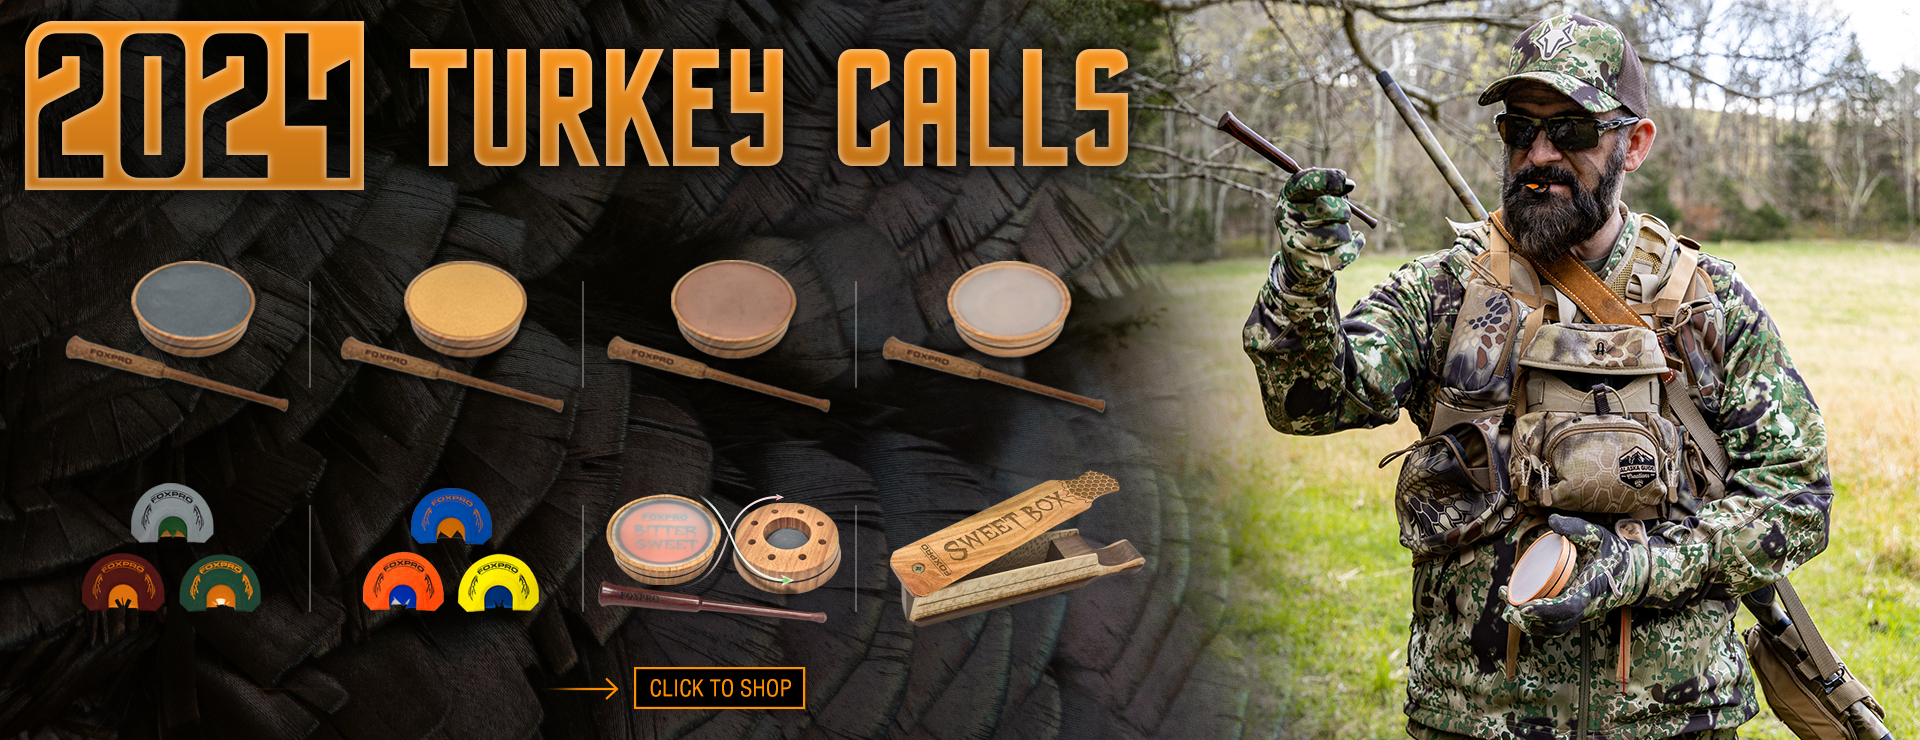 FOXPRO Turkey Hunting Products